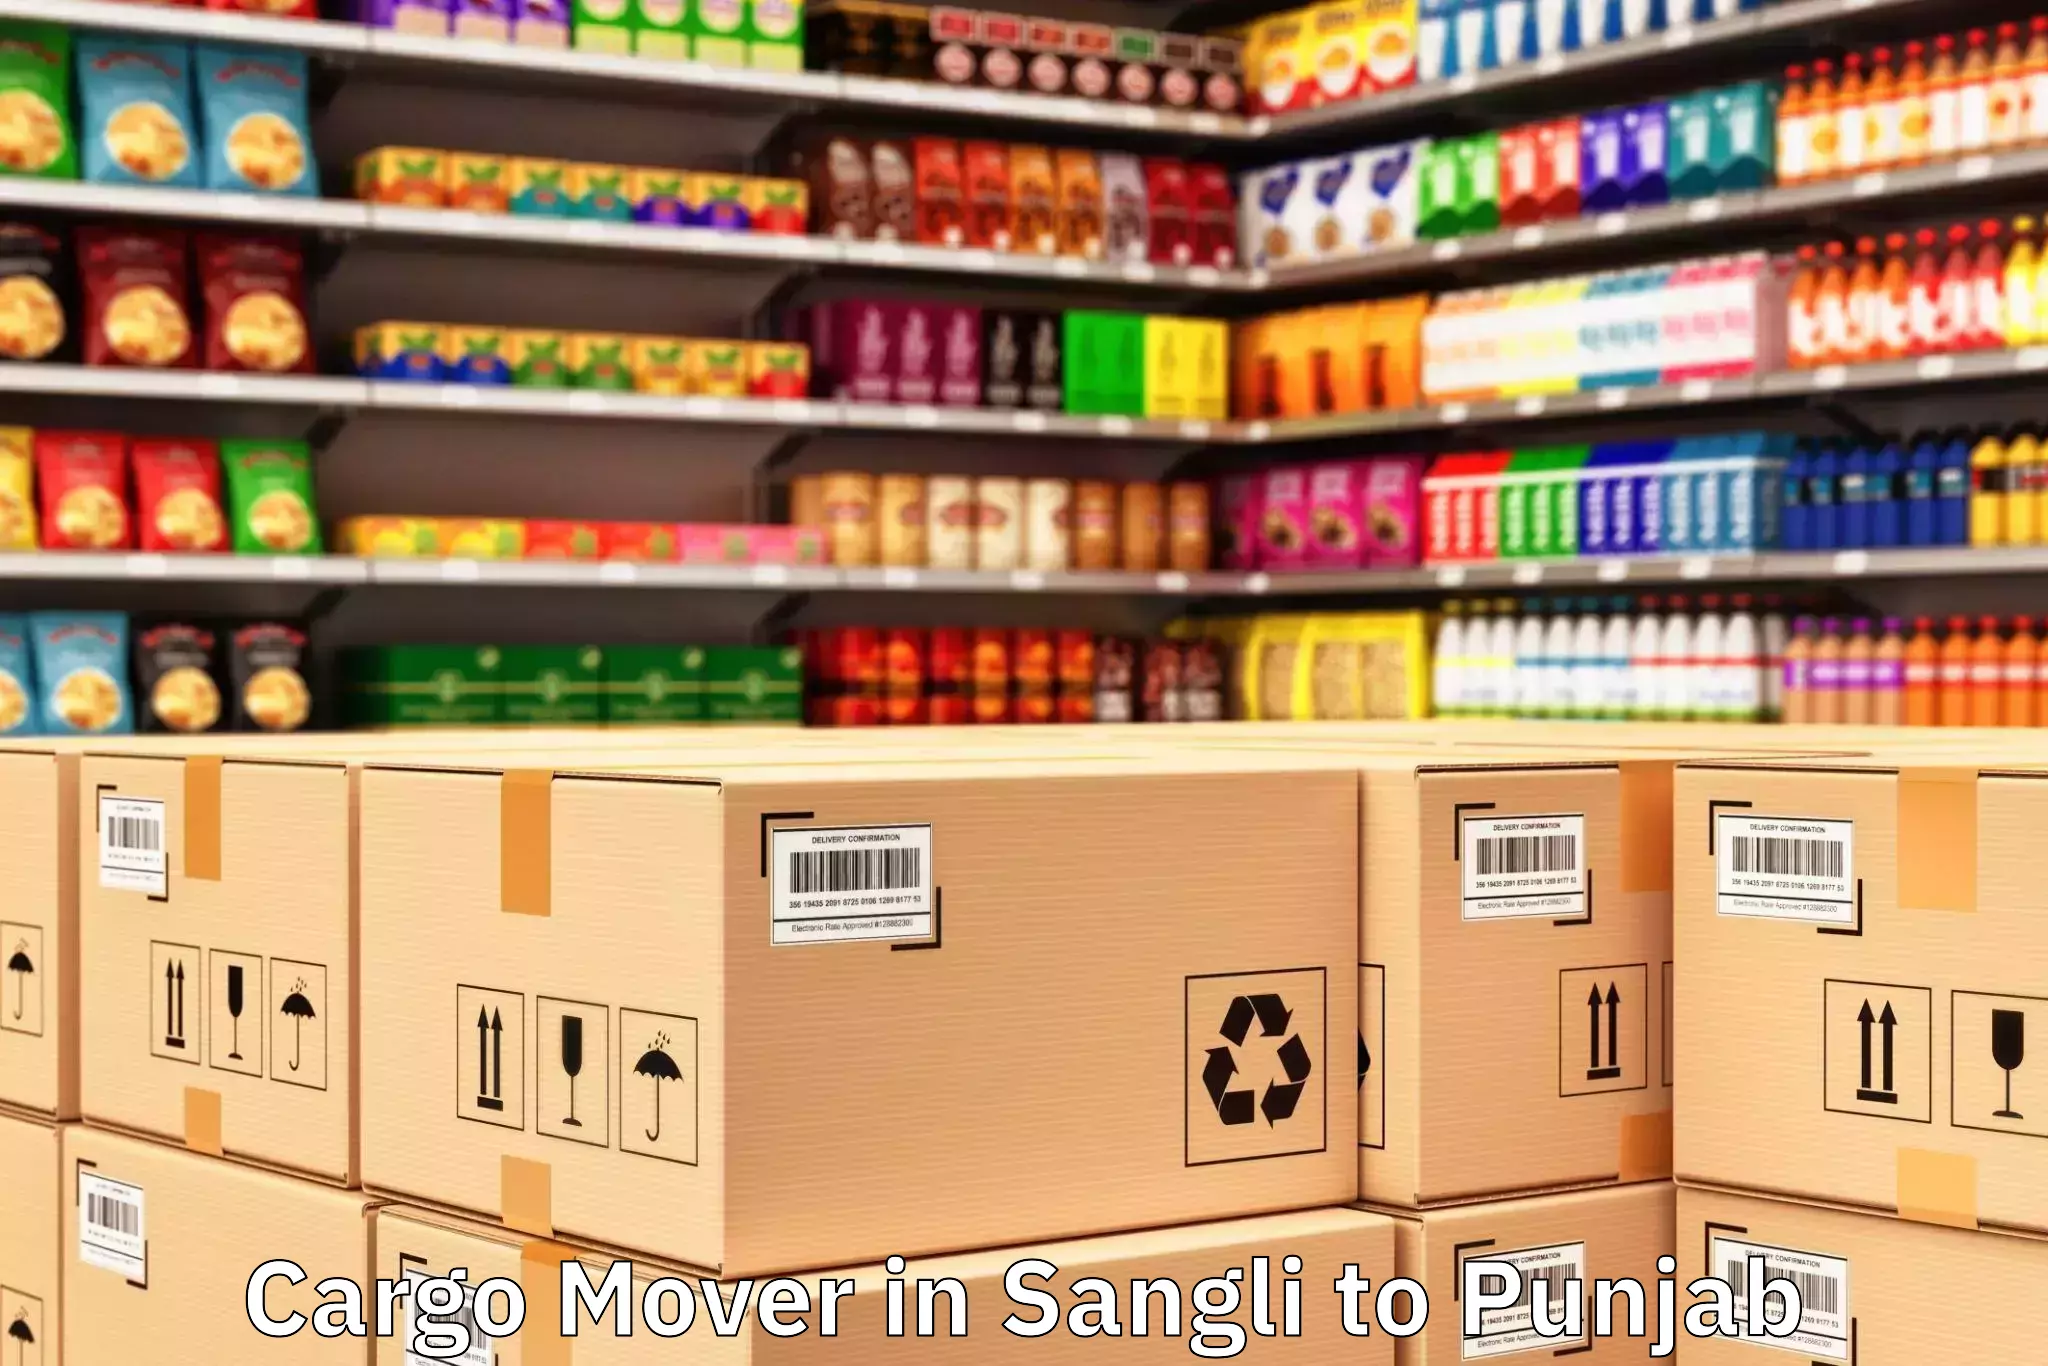 Trusted Sangli to Punjab Cargo Mover